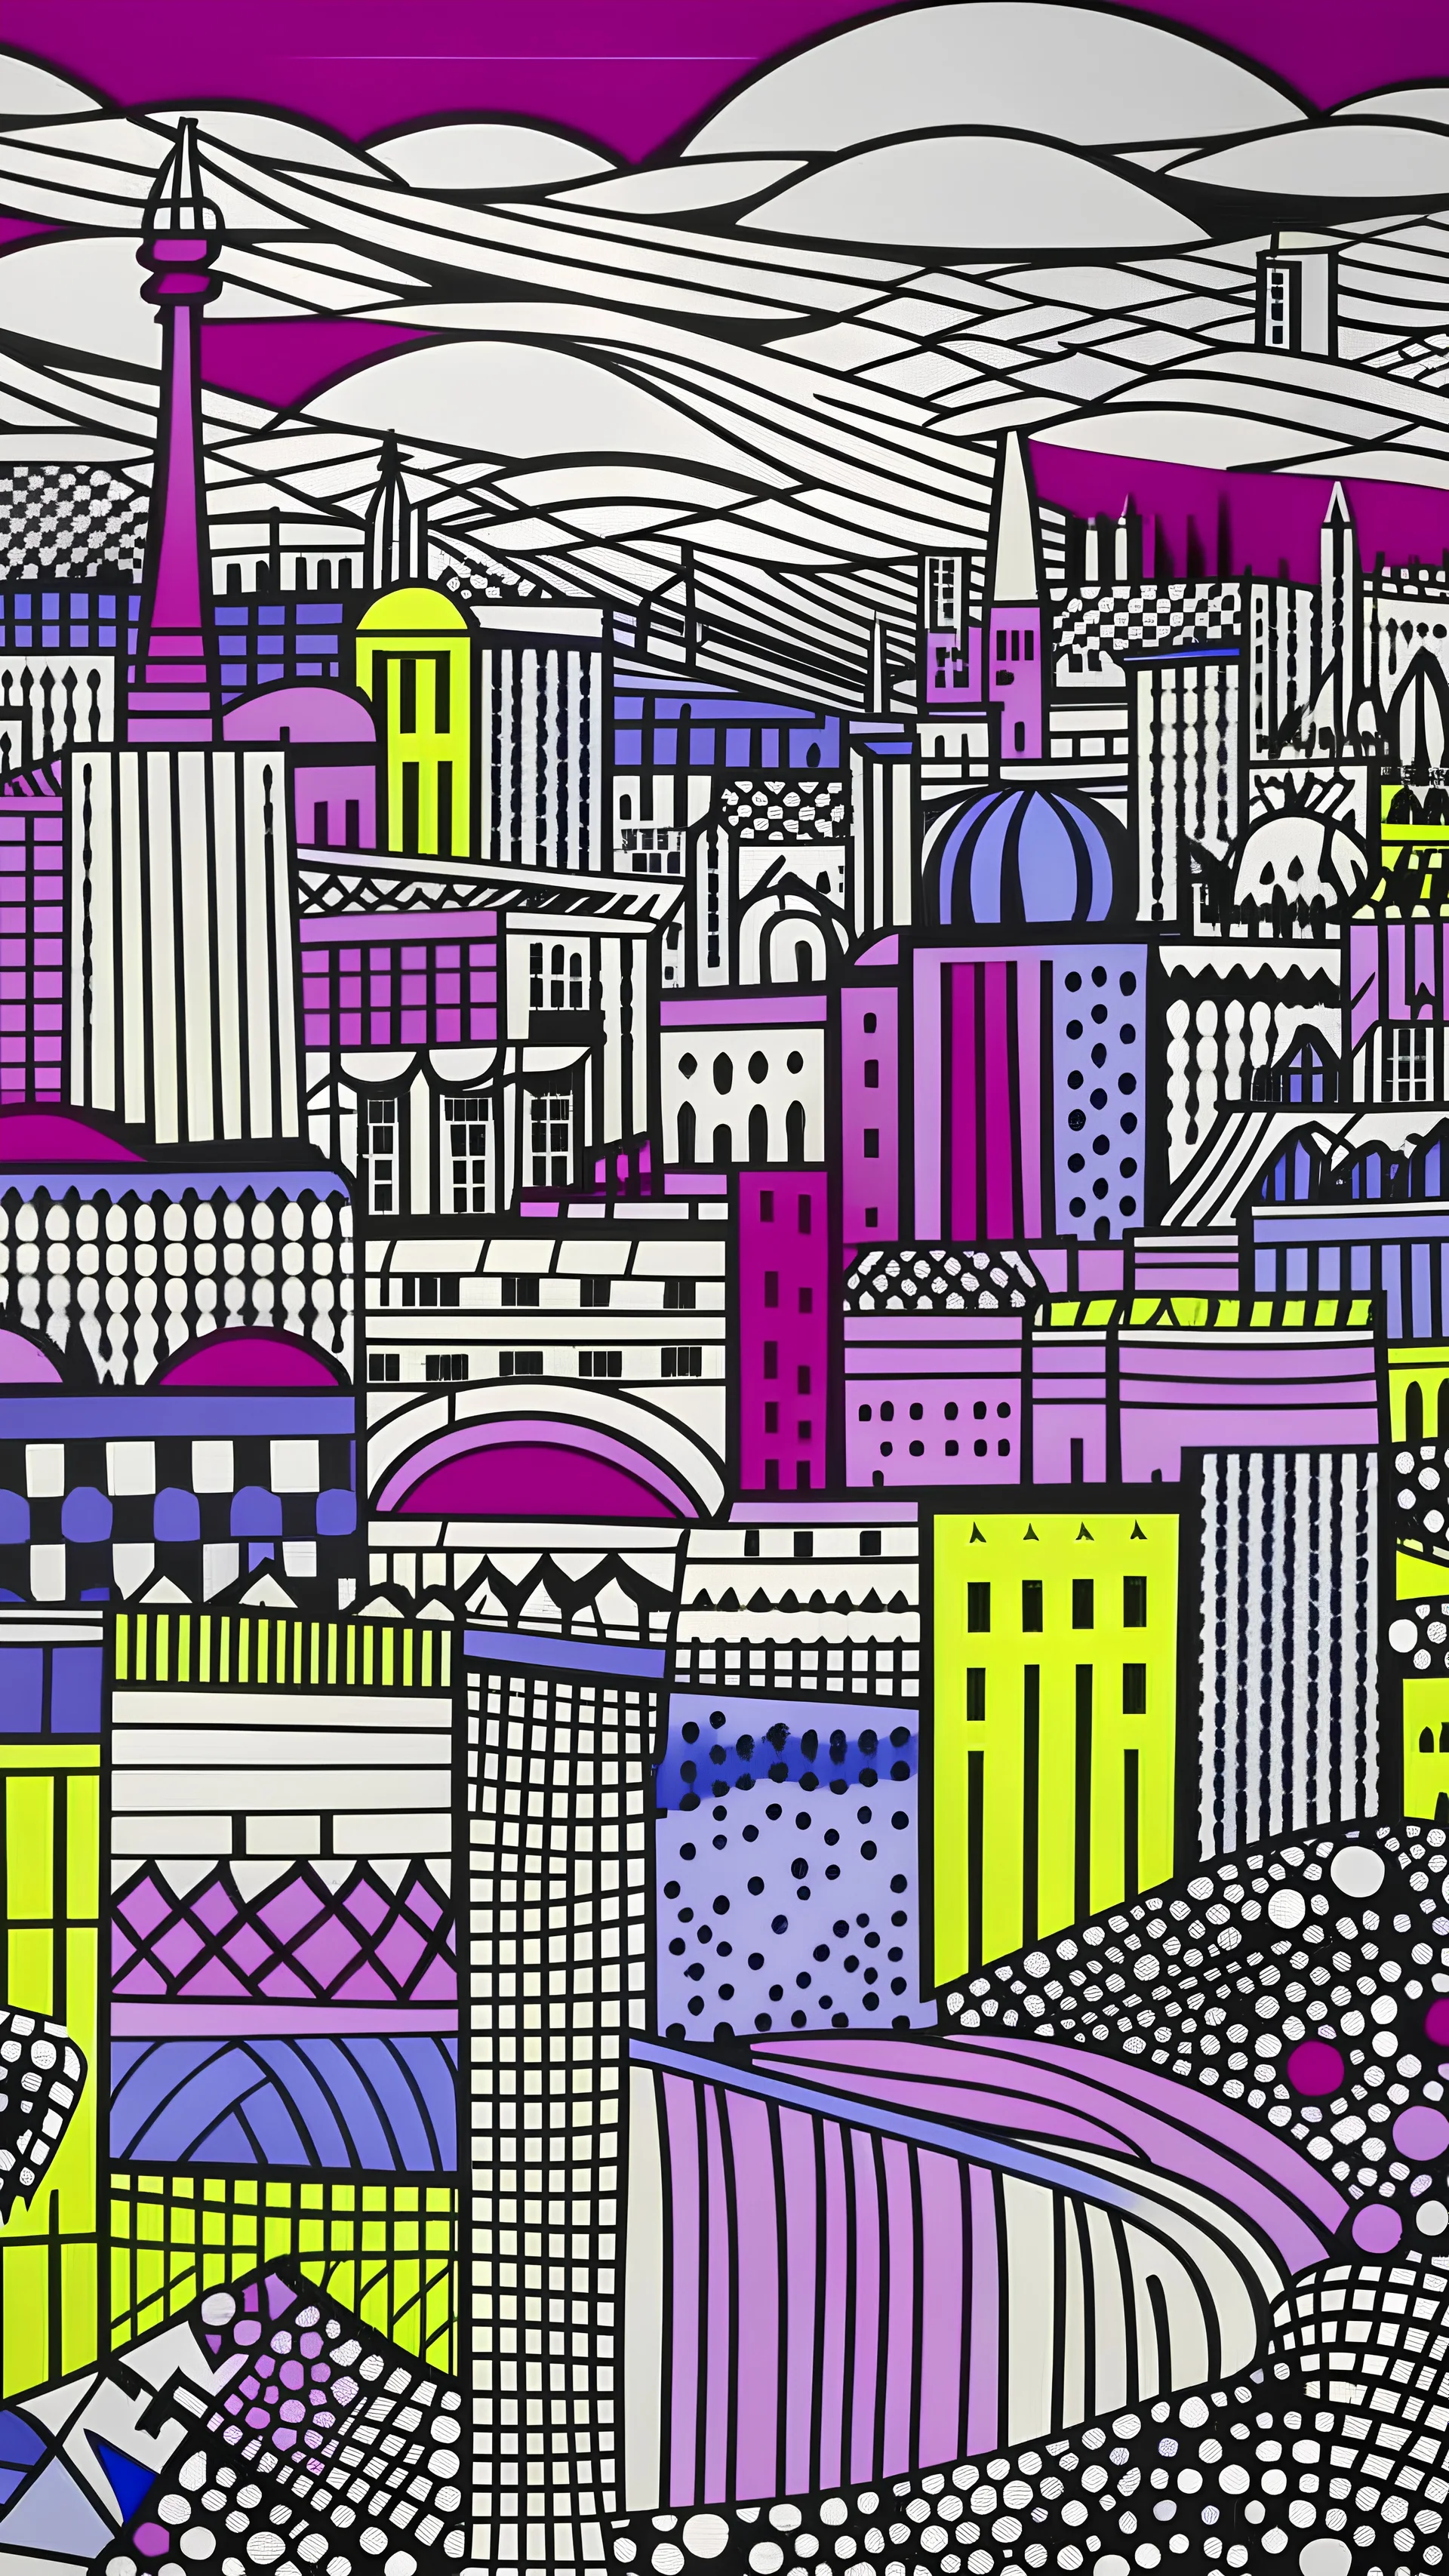 A grayish magenta noisy city designed in Bayeux tapestry painted by Roy Lichtenstein